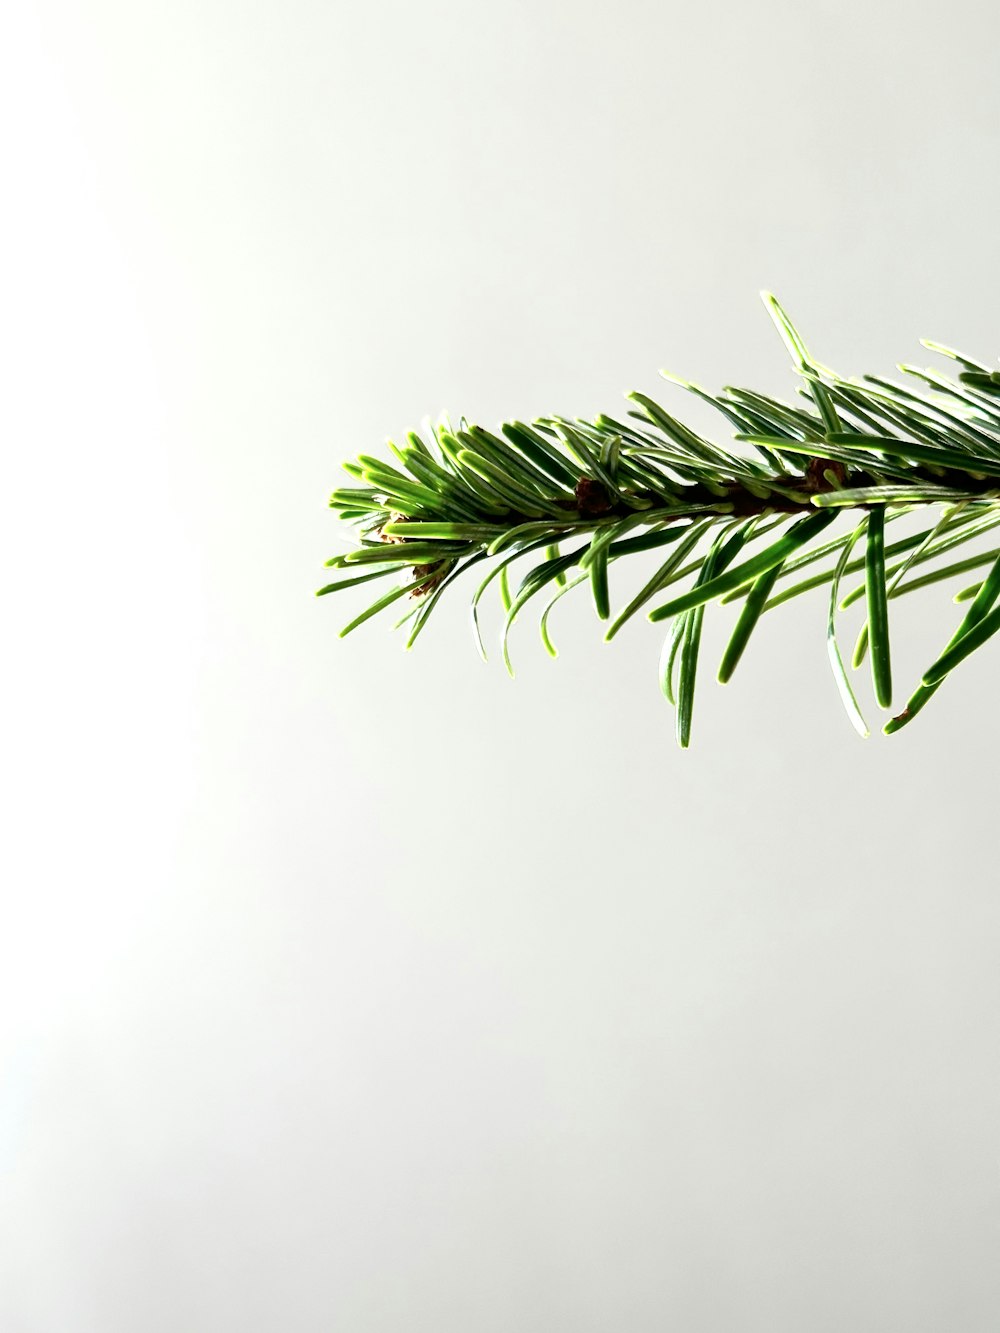 a close up of a pine branch on a white background